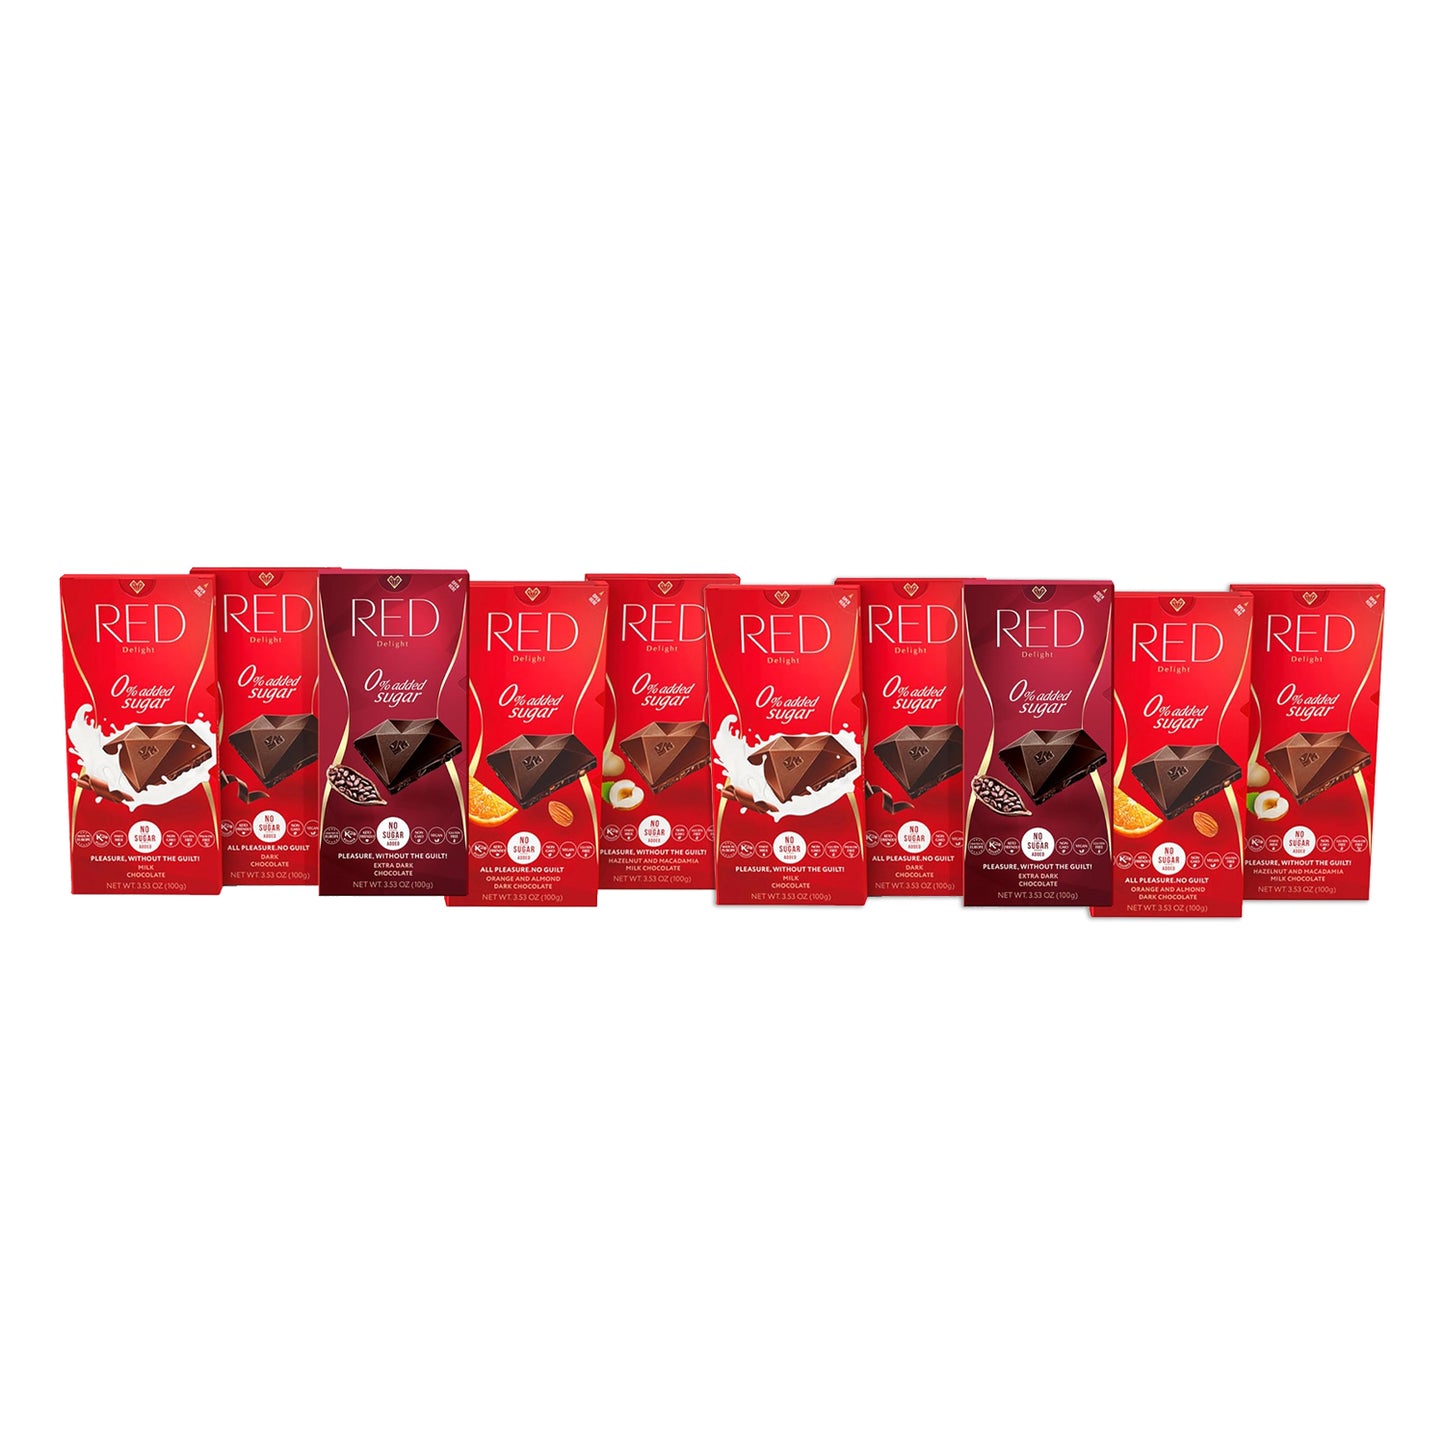 Binge Night Variety Packs - Explore Our Delicious Chocolate Assortments